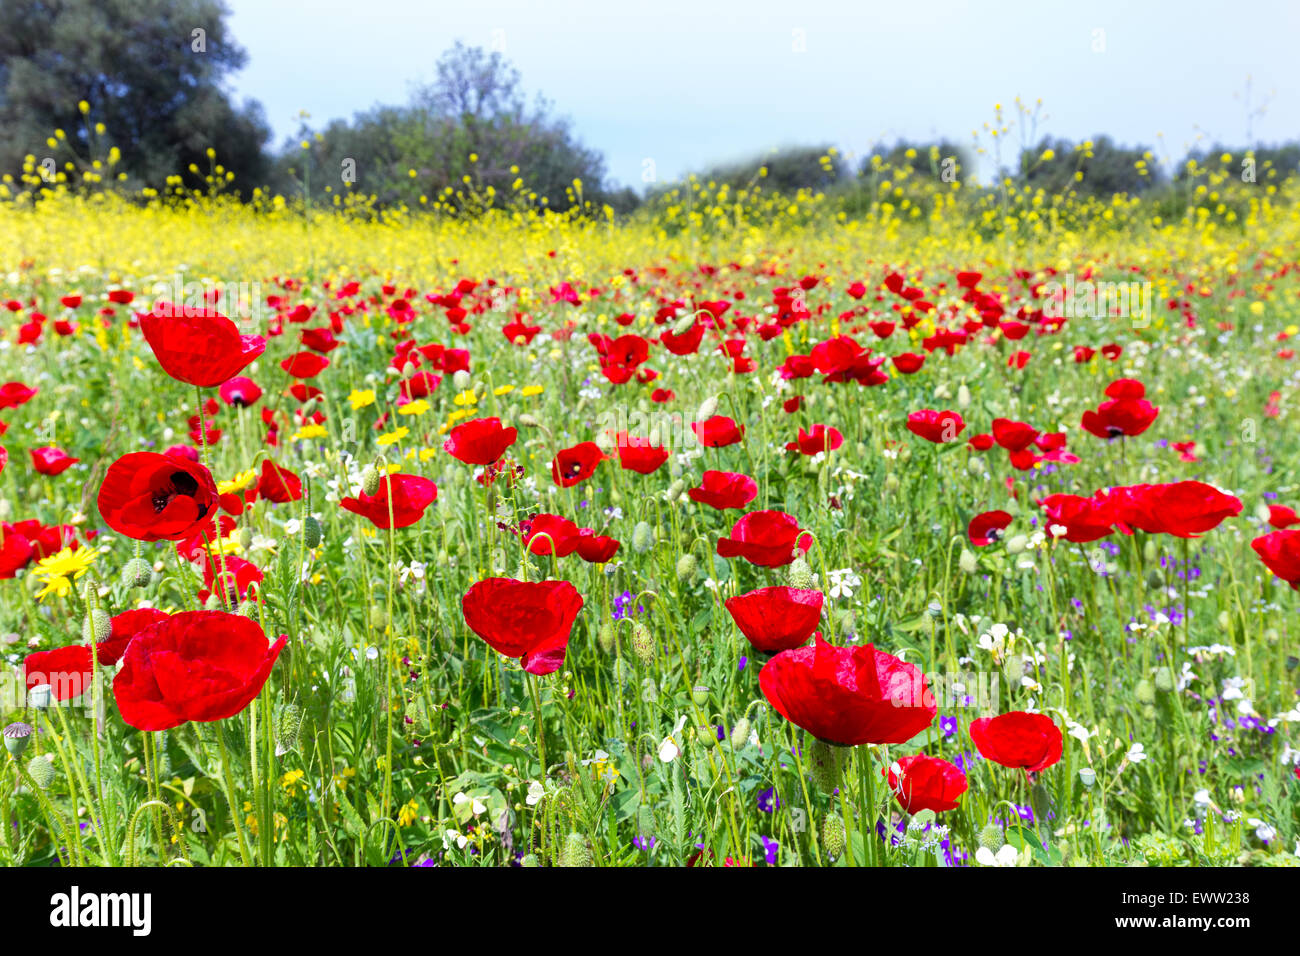 Landscape field of red poppy flowers with yellow rapeseed plants in summer season Stock Photo